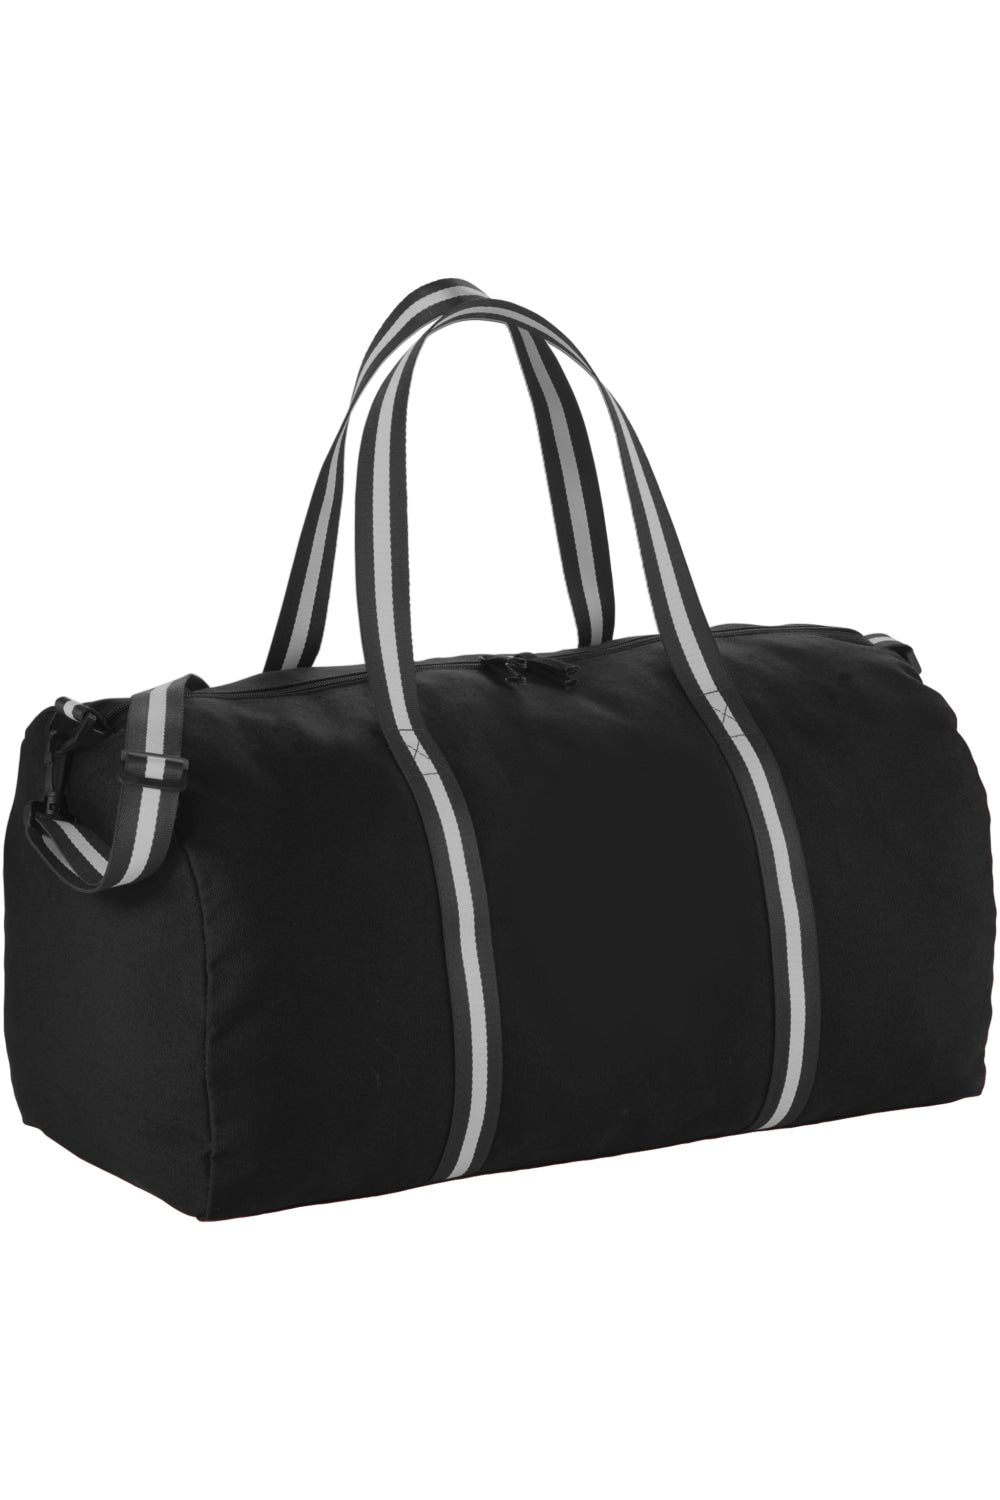 Bullet Cotton Weekender Duffel (Solid Black) (21.7 x 9 x 11 inches)